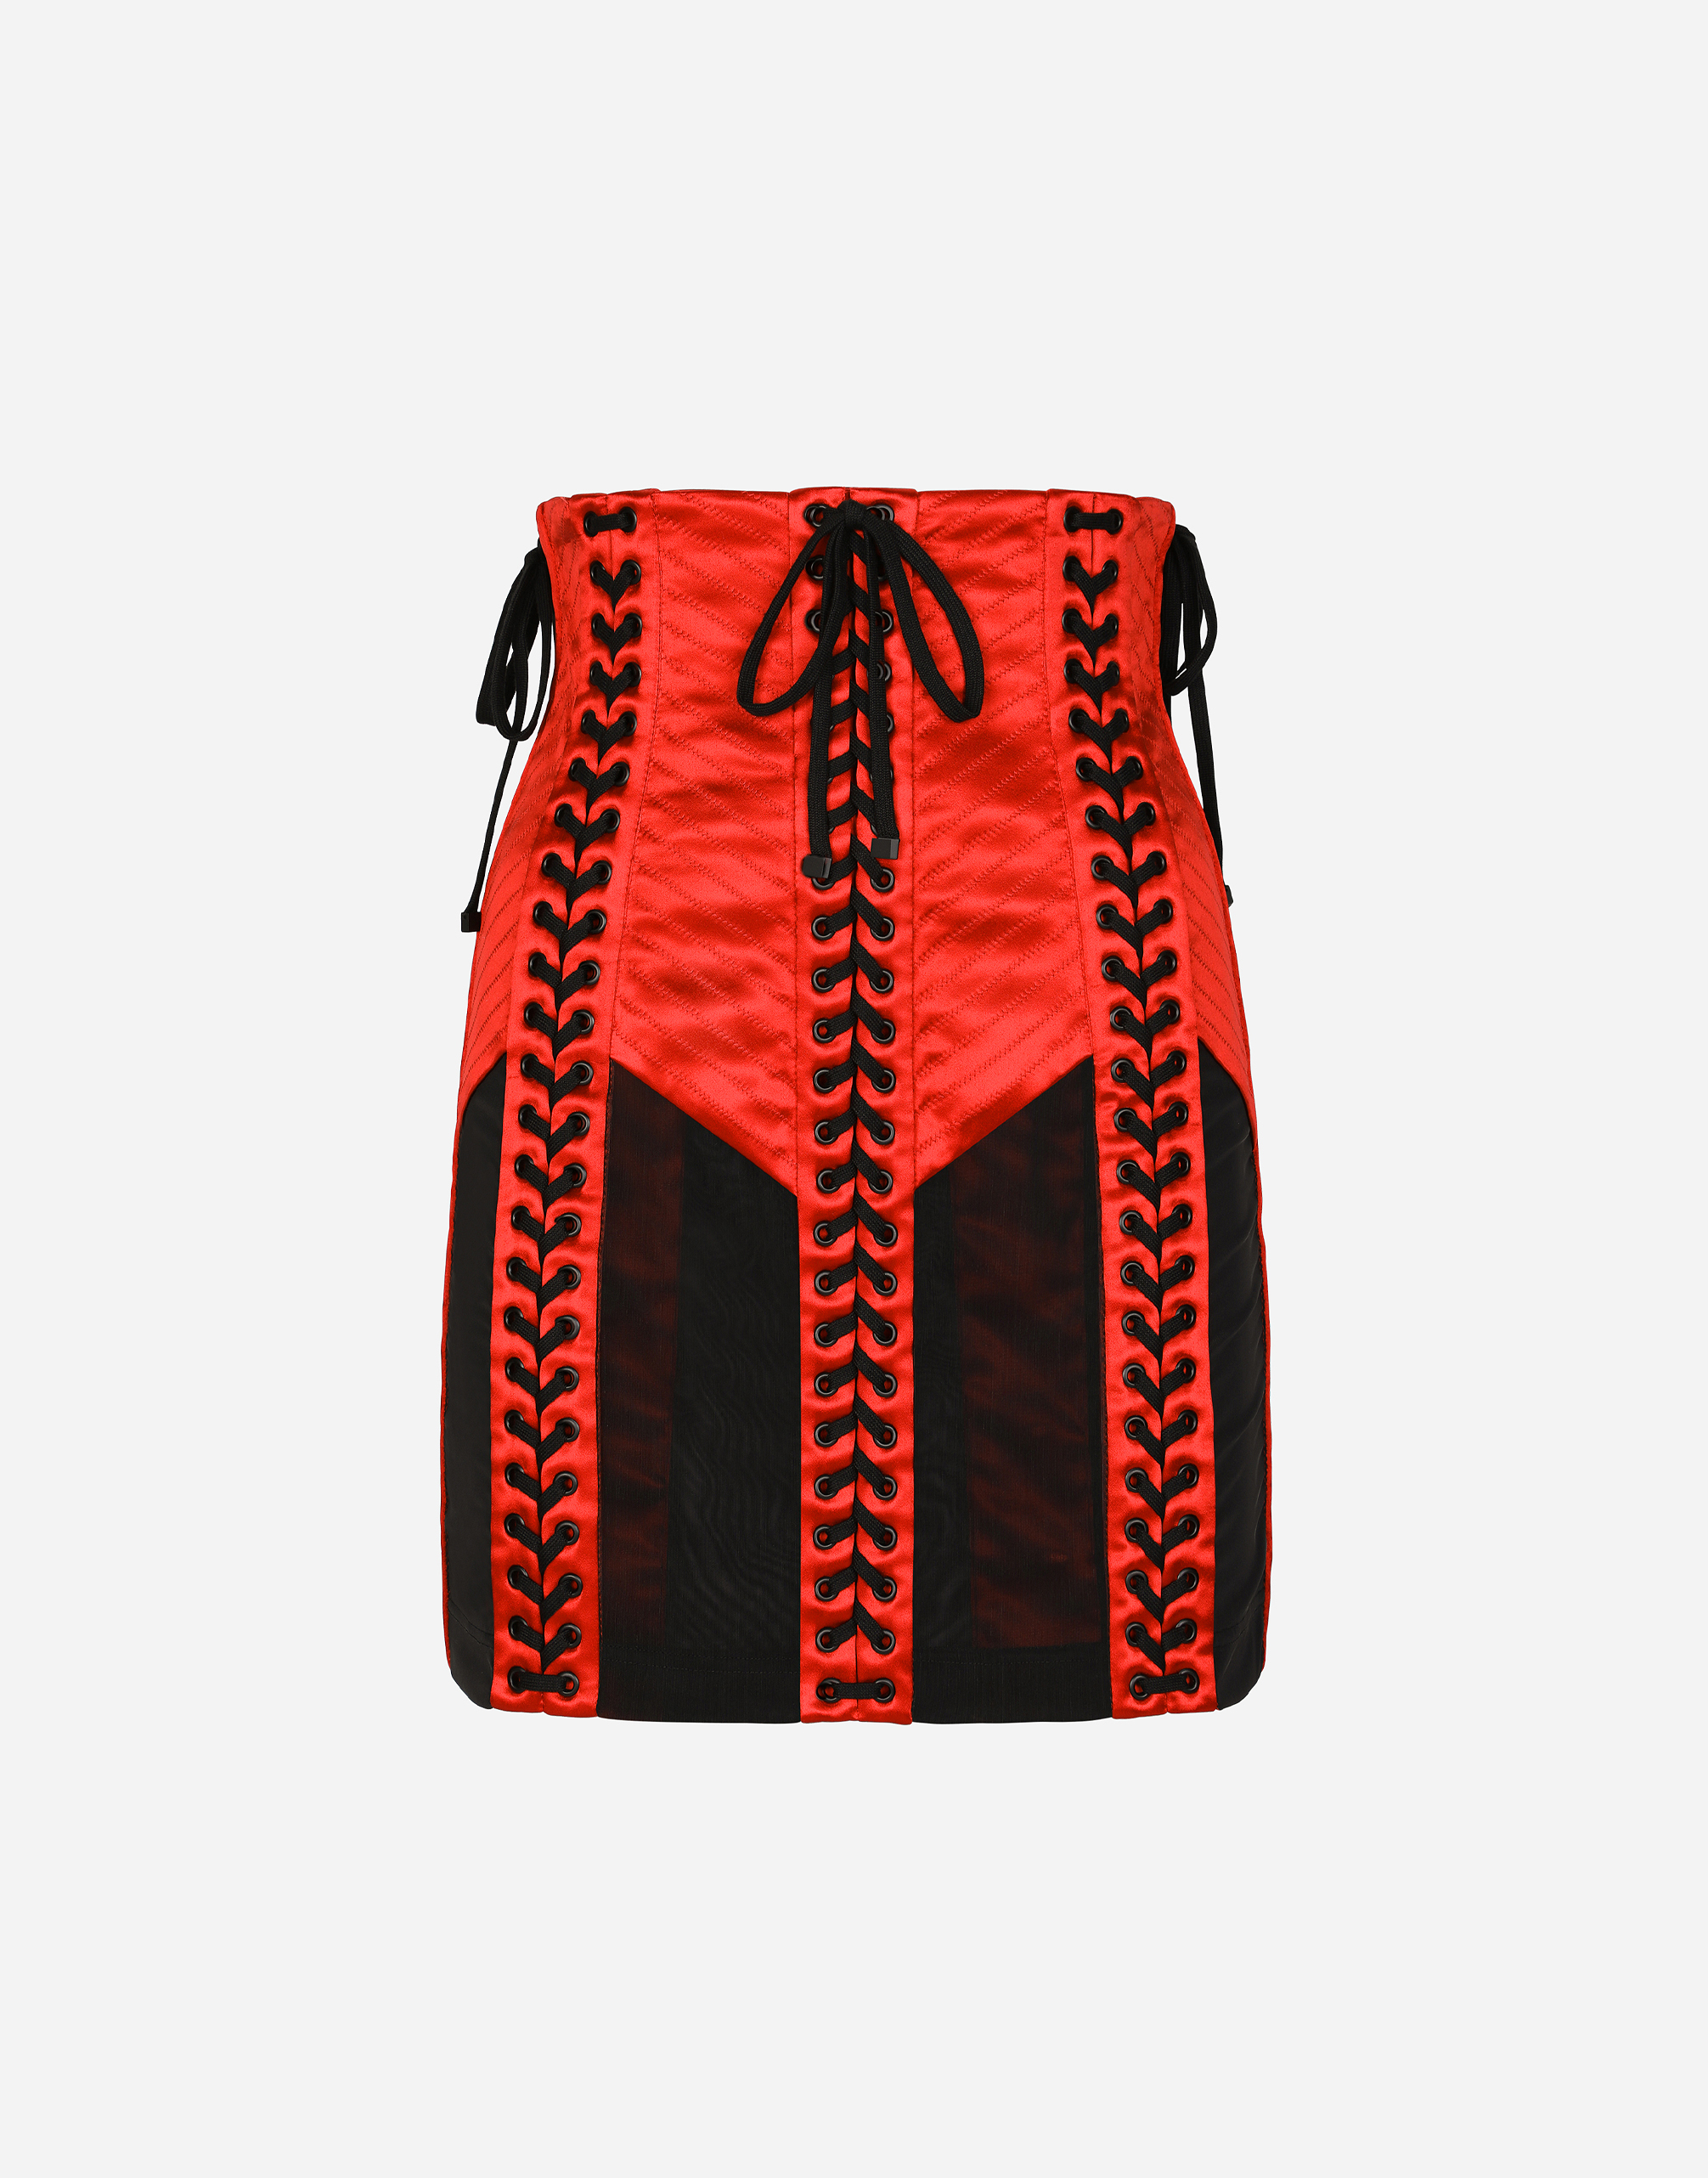 Corset-style miniskirt with laces and eyelets in Red